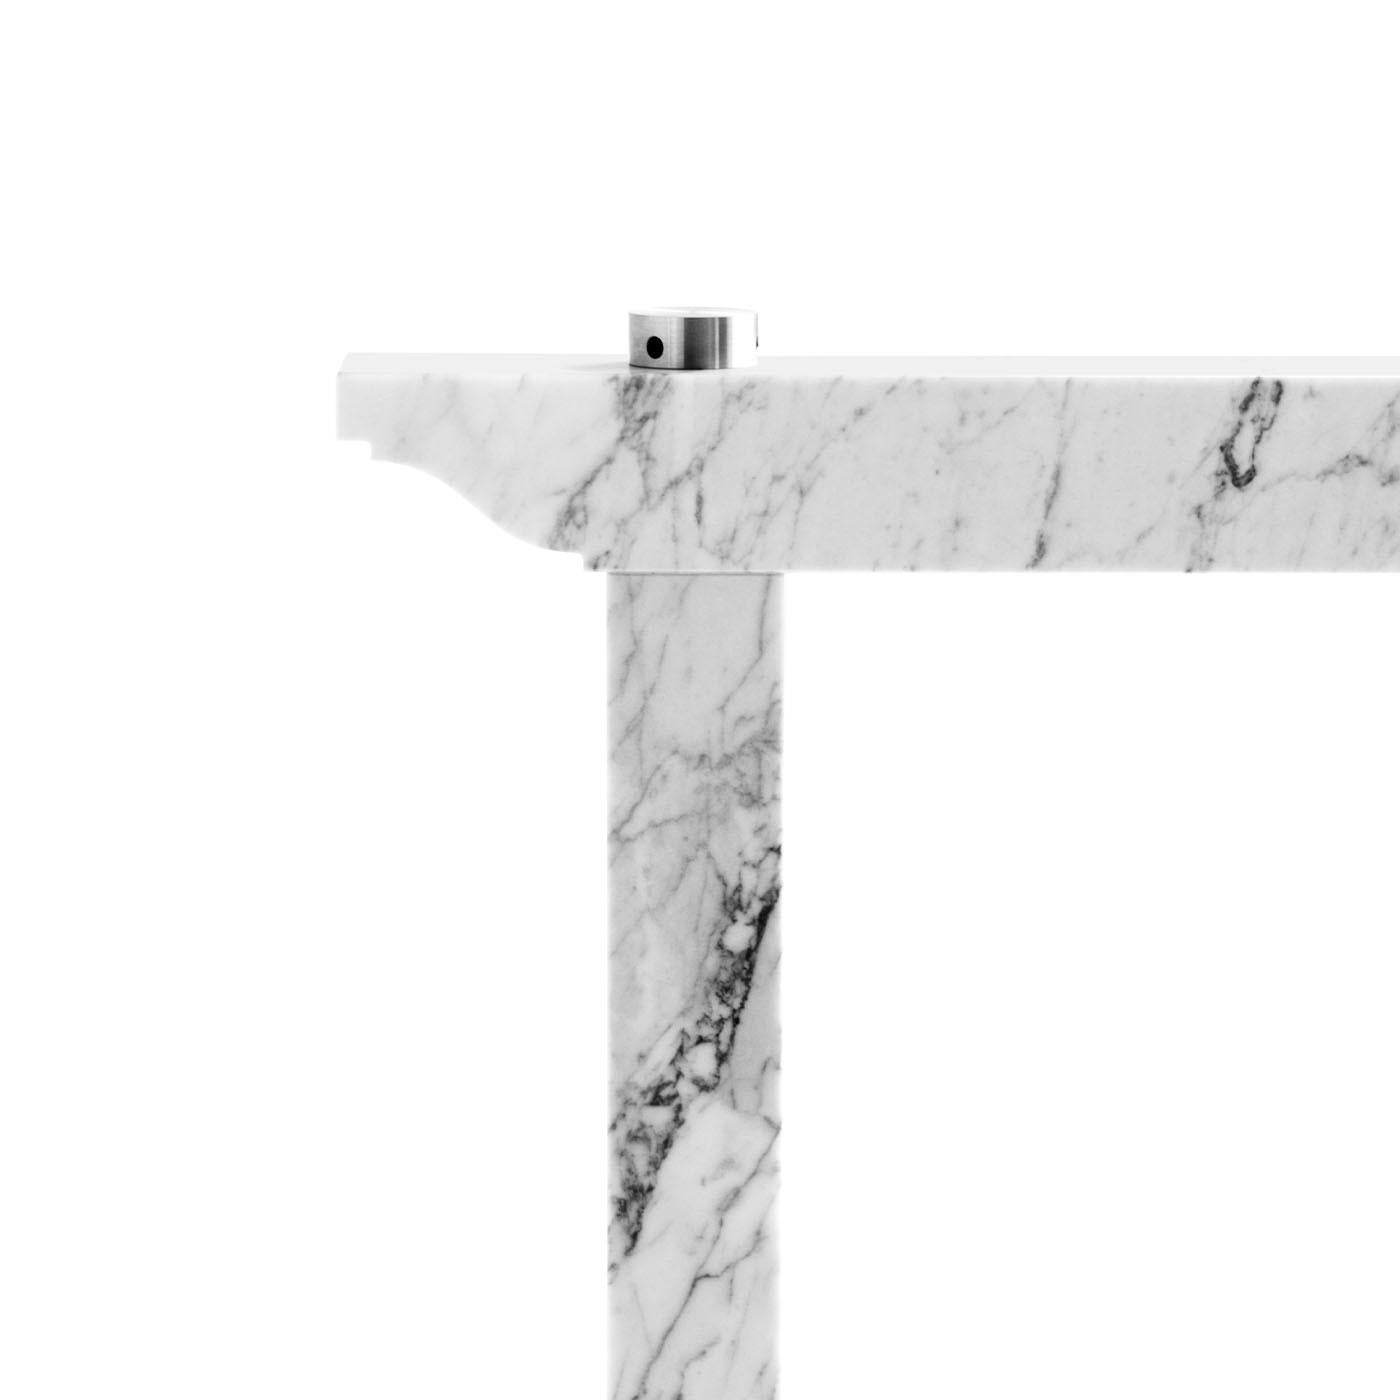 This Carrara white marble trestle, designed by Enrico Tonucci, is made to support tops in glass, wood, marble or other materials. Its lines, rigorous and squared, design an upside-down U letter. The only whim is a decoration on the sides that evokes